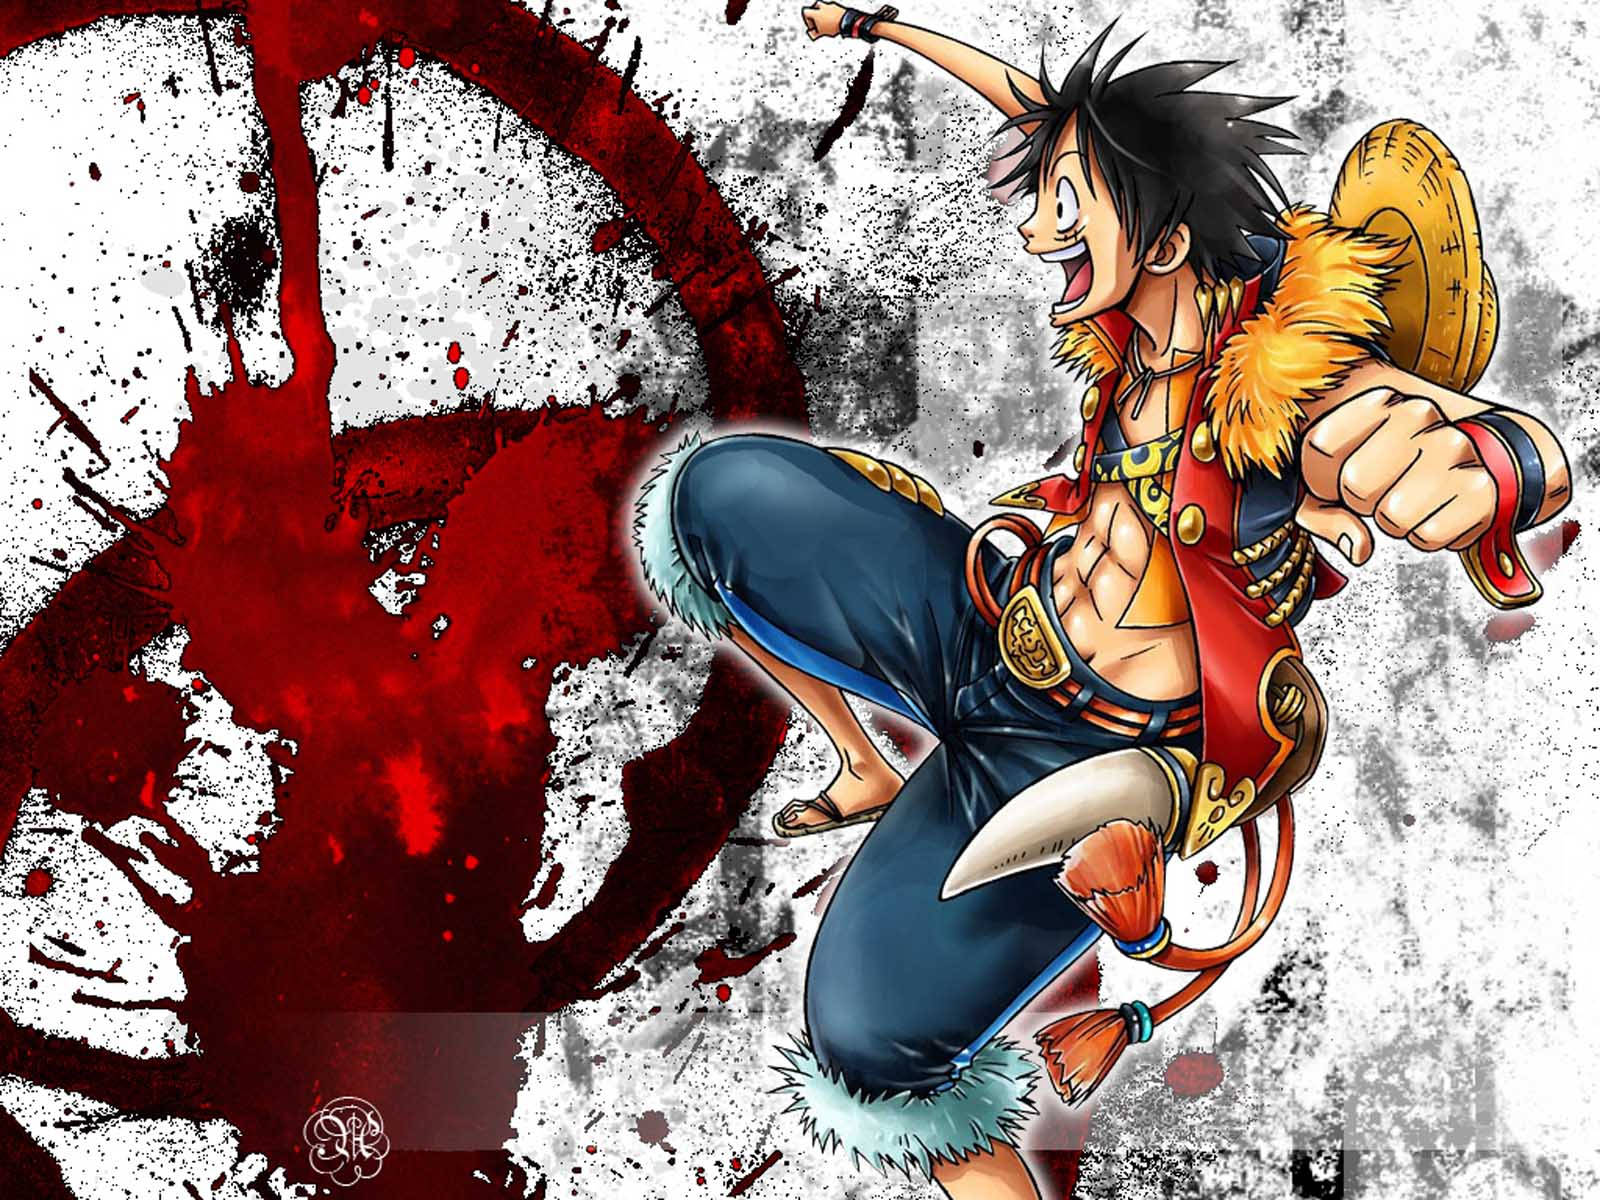 Luffy 4k With Pool Of Blood Wallpaper